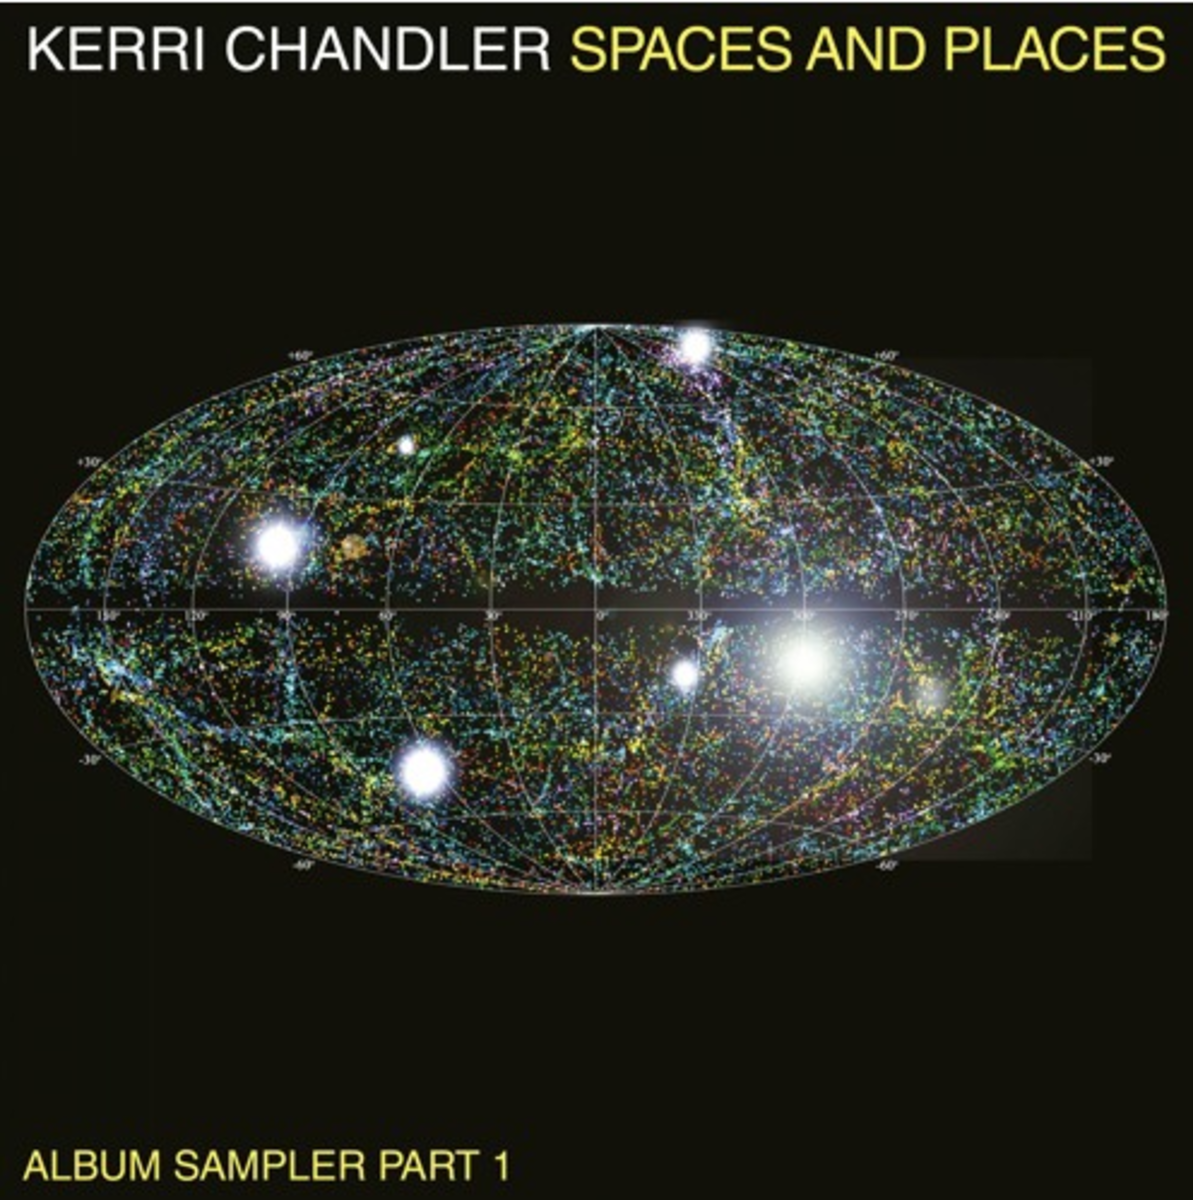 7. "You Get Lost In It [The Warehouse Project] (Full Vocal Main Mix)" - Kerri Chandler, Lady Linn [Kaoz Theory]